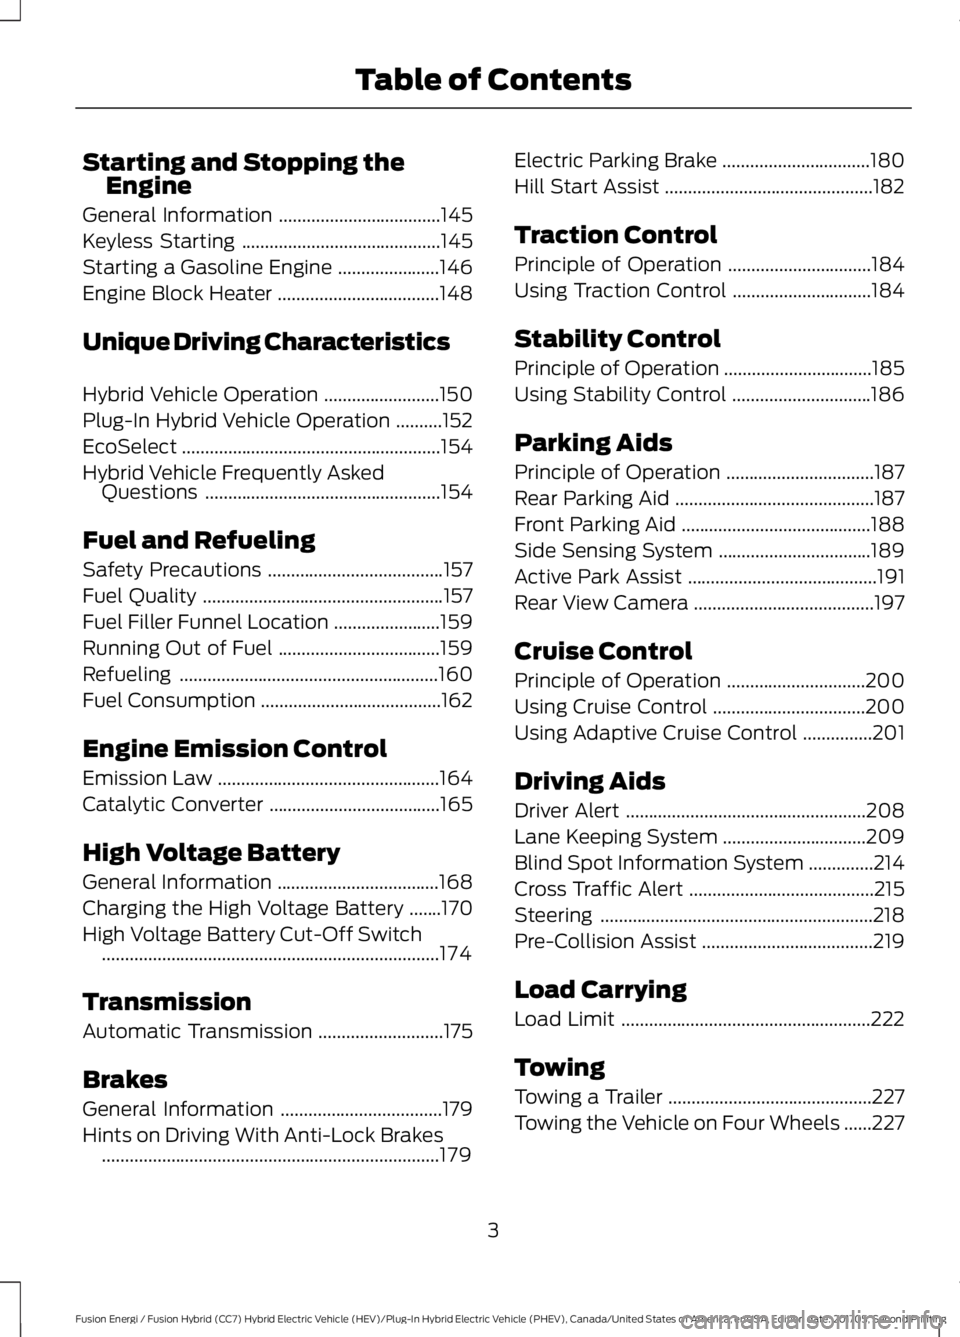 FORD FUSION ENERGI 2018  Owners Manual Starting and Stopping theEngine
General Information...................................145
Keyless Starting...........................................145
Starting a Gasoline Engine.....................